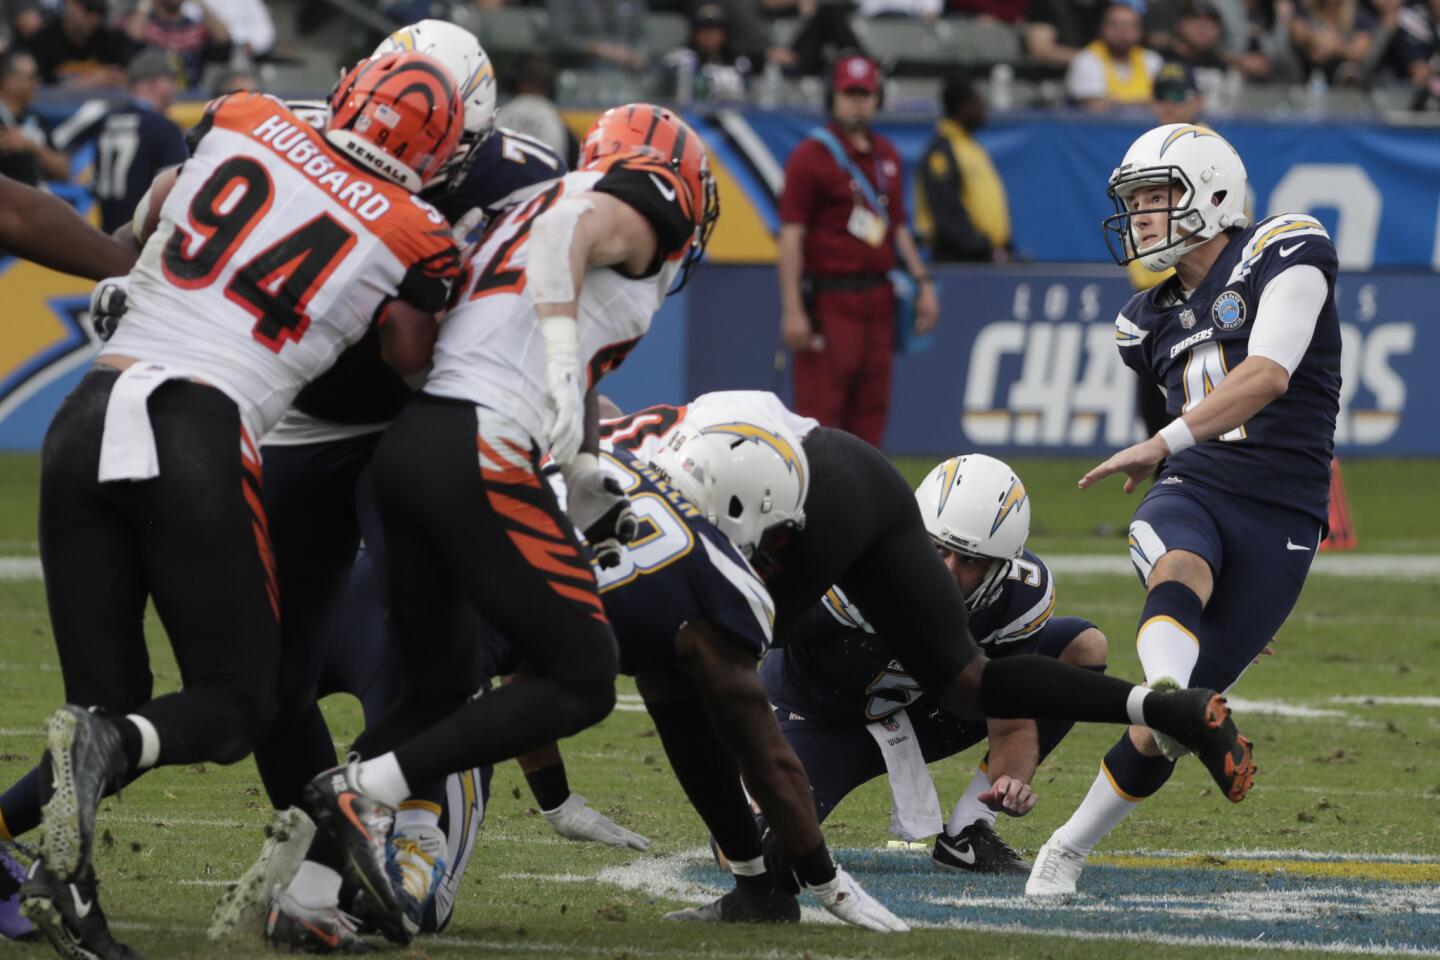 Michael Badgley connects on a 59-yard field goal, the longest in Chargers history, to end the first half.